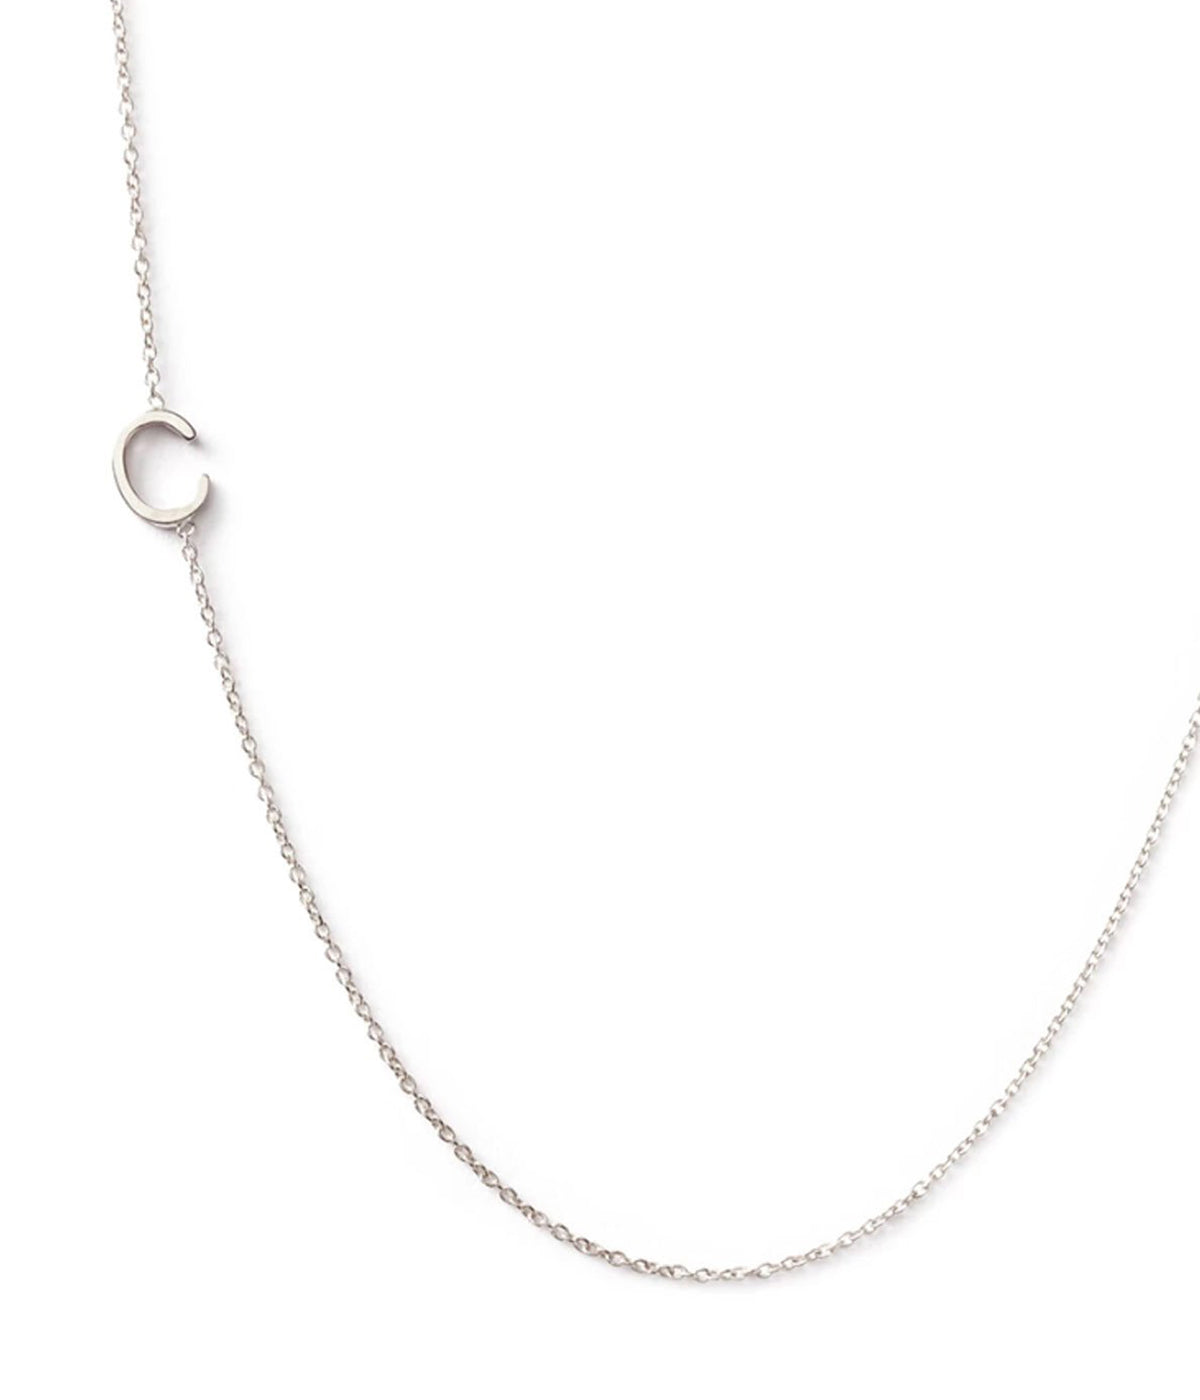 Initial Necklace in White Gold